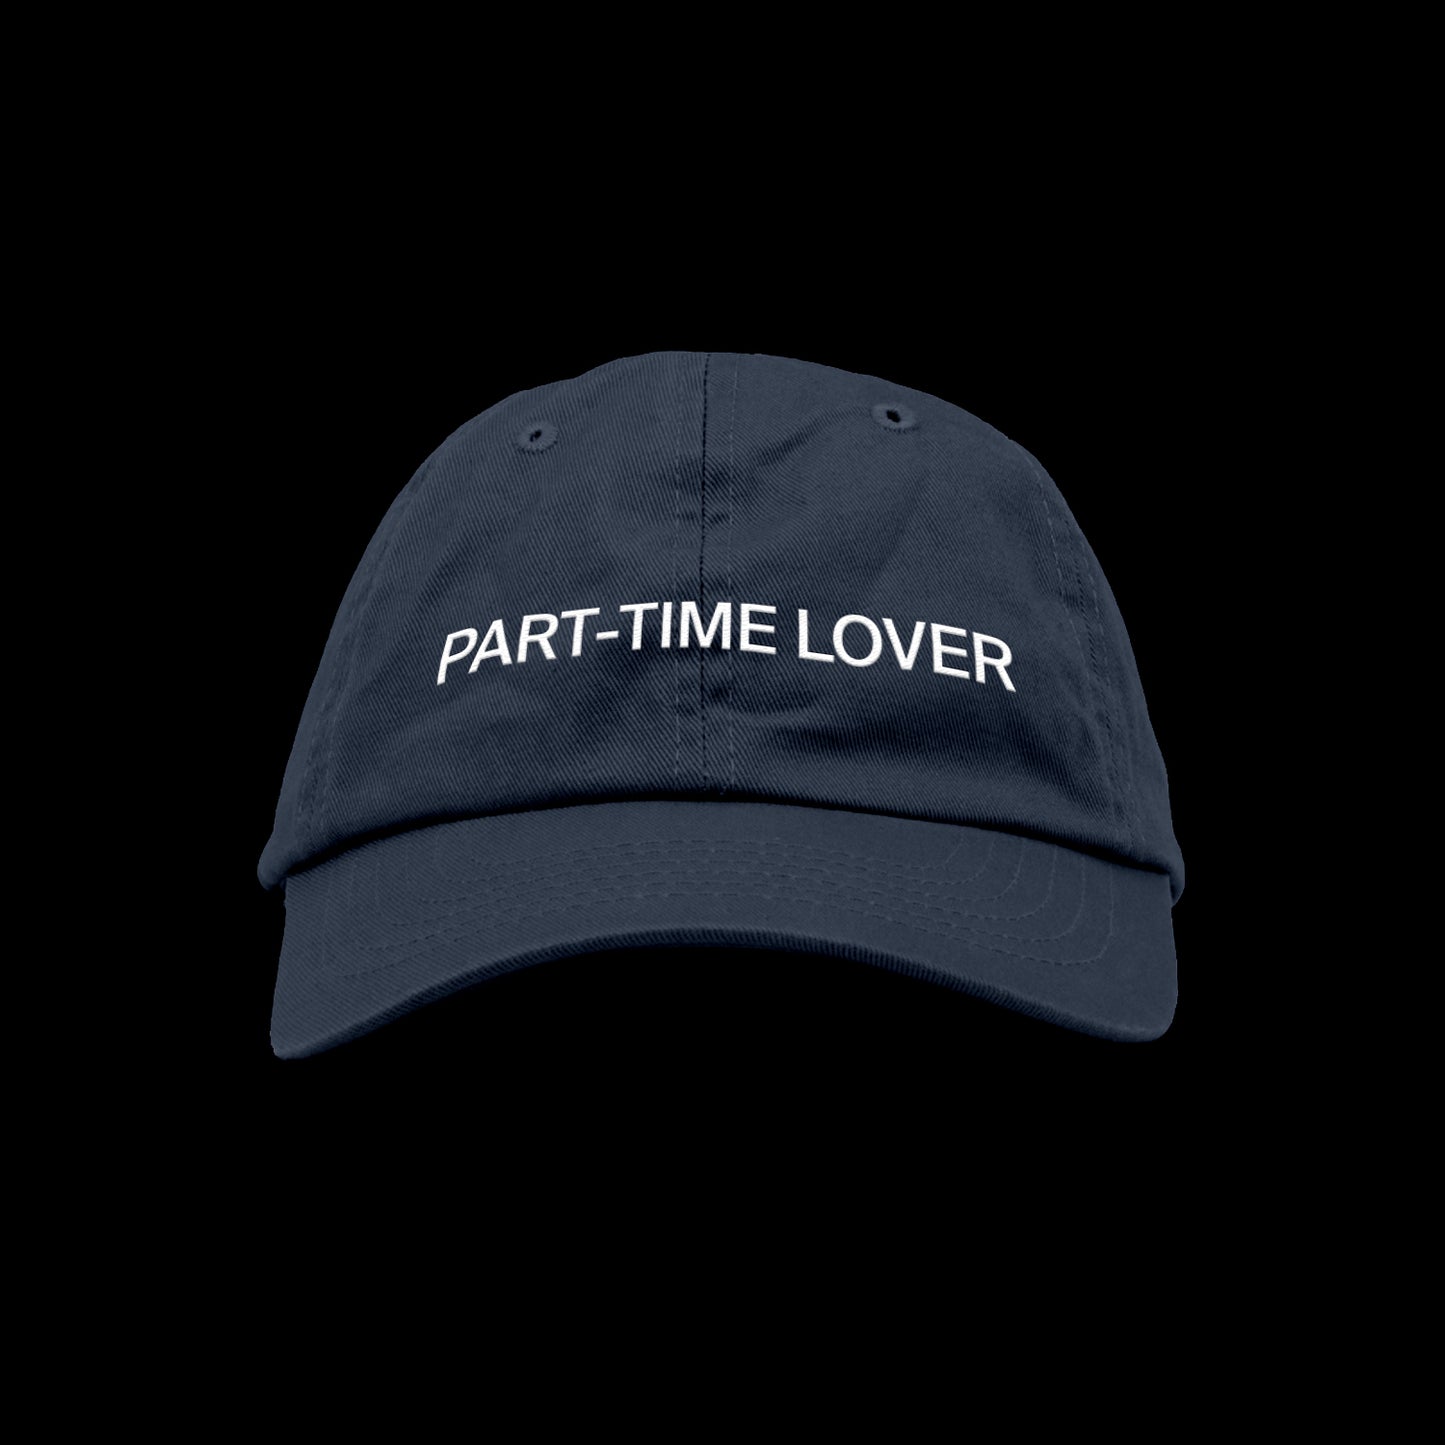 PART-TIME LOVER